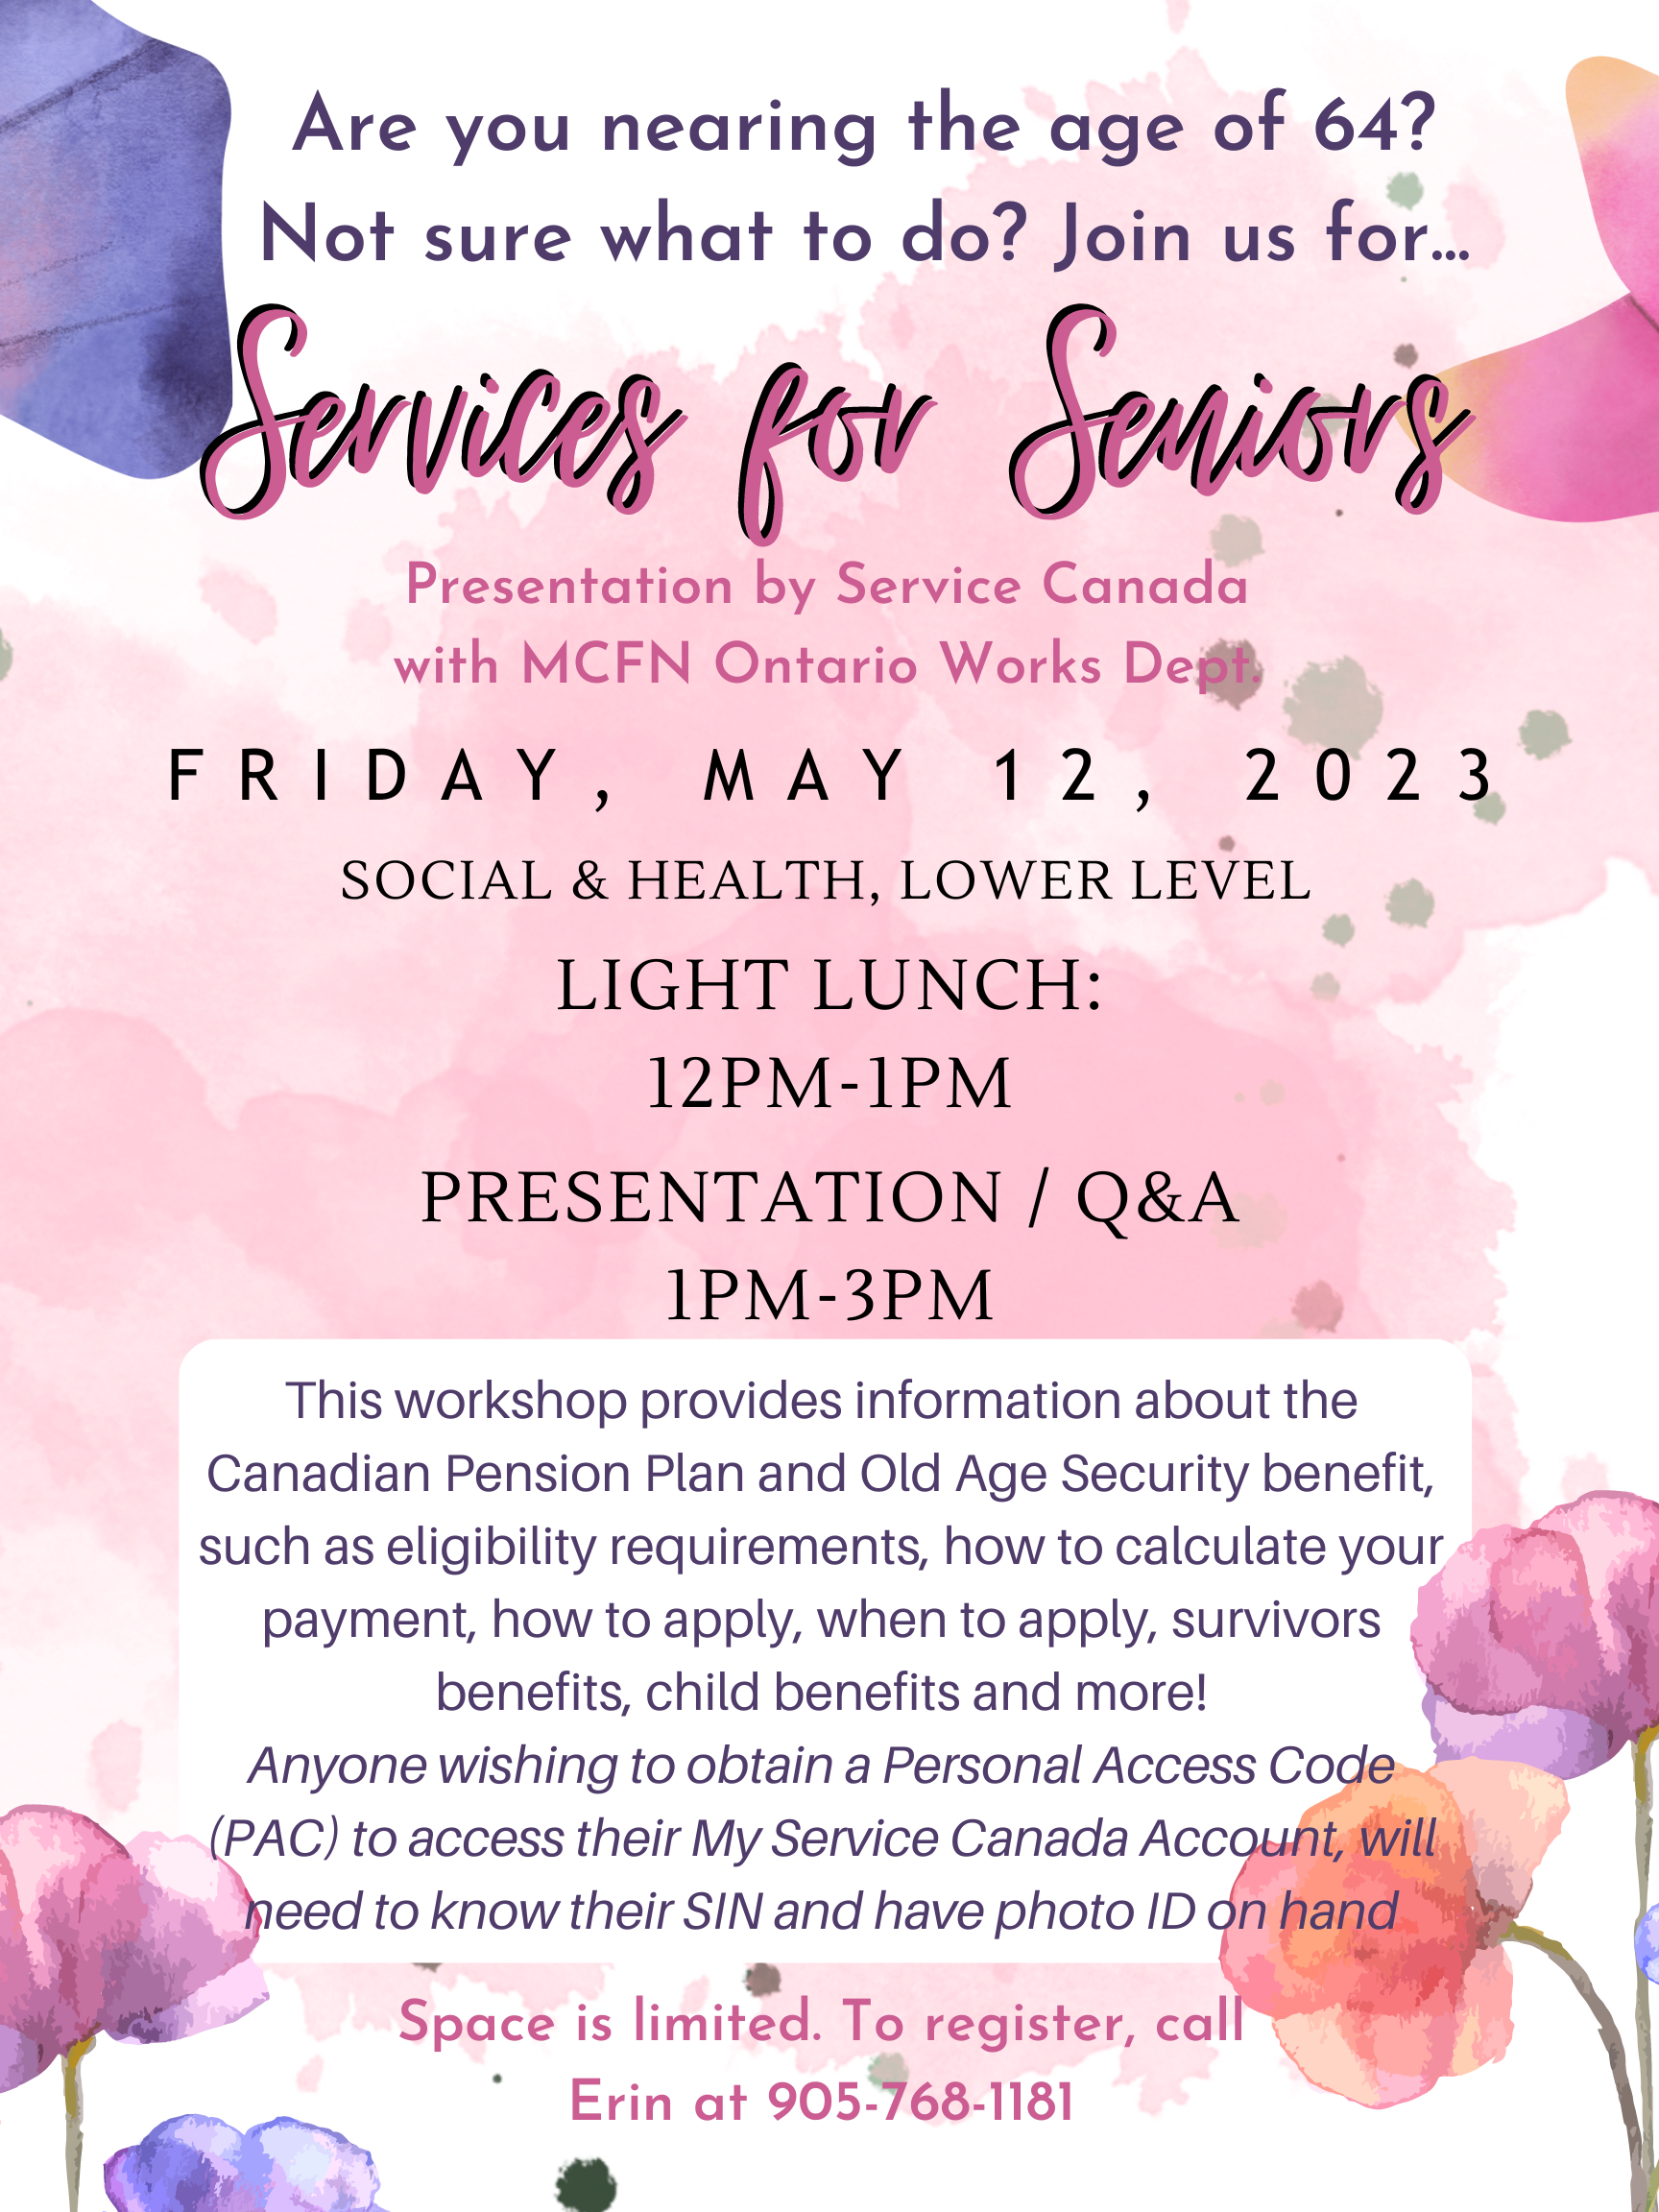 MCFN Services for Seniors